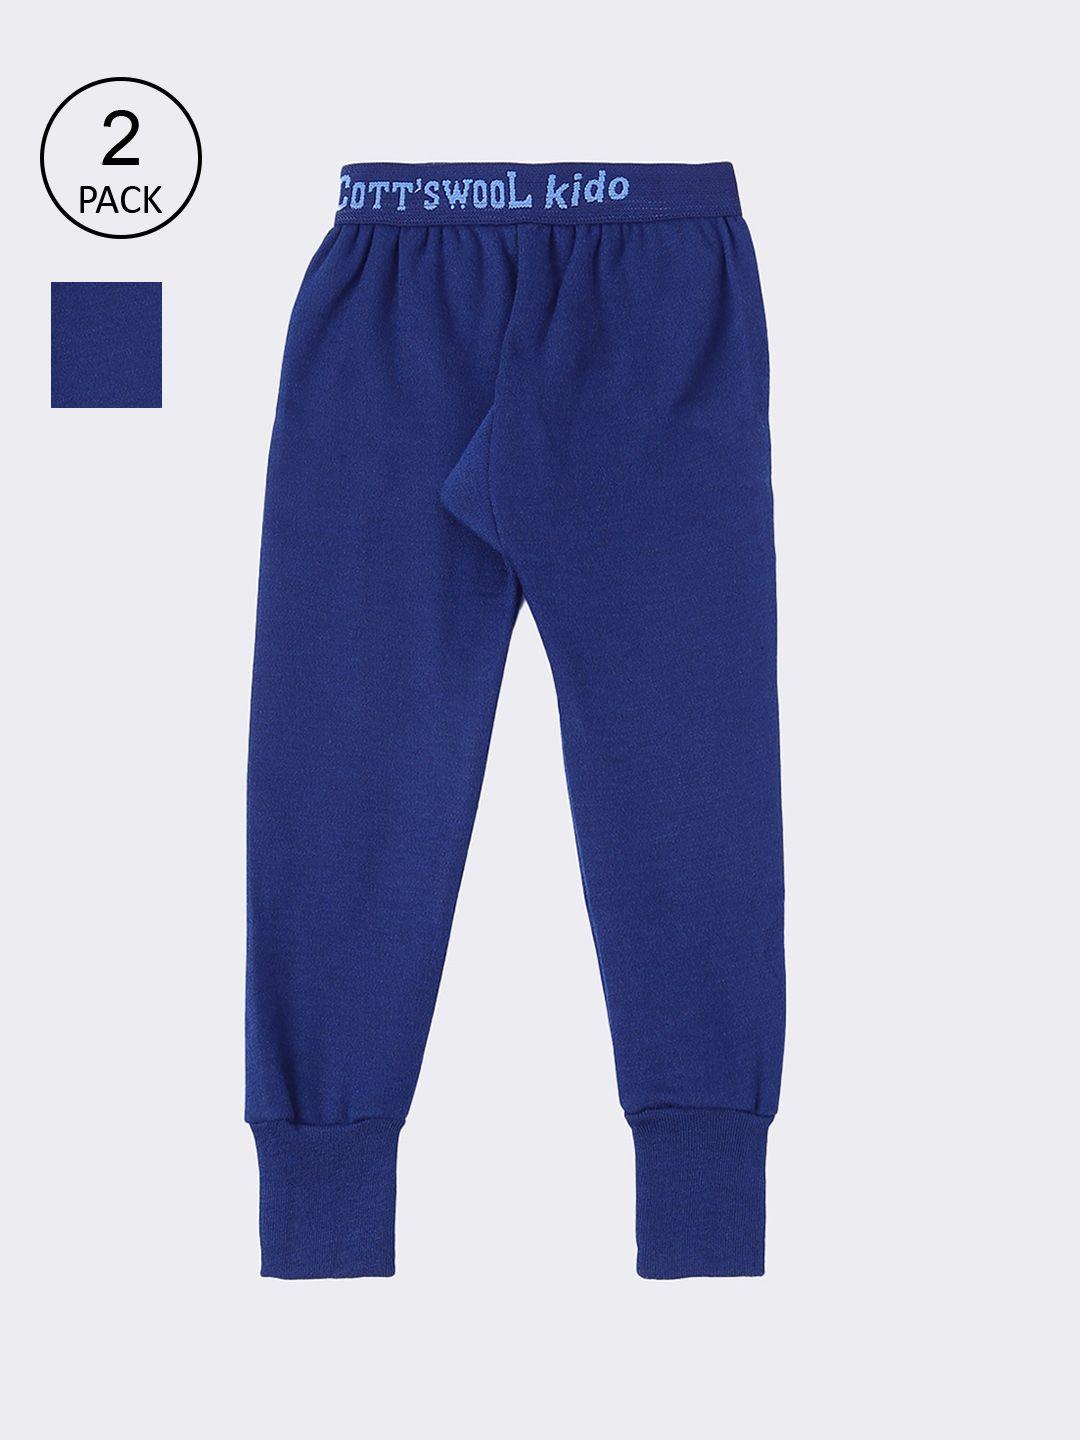 lux cottswool boys pack of 2 blue solid thermal bottoms